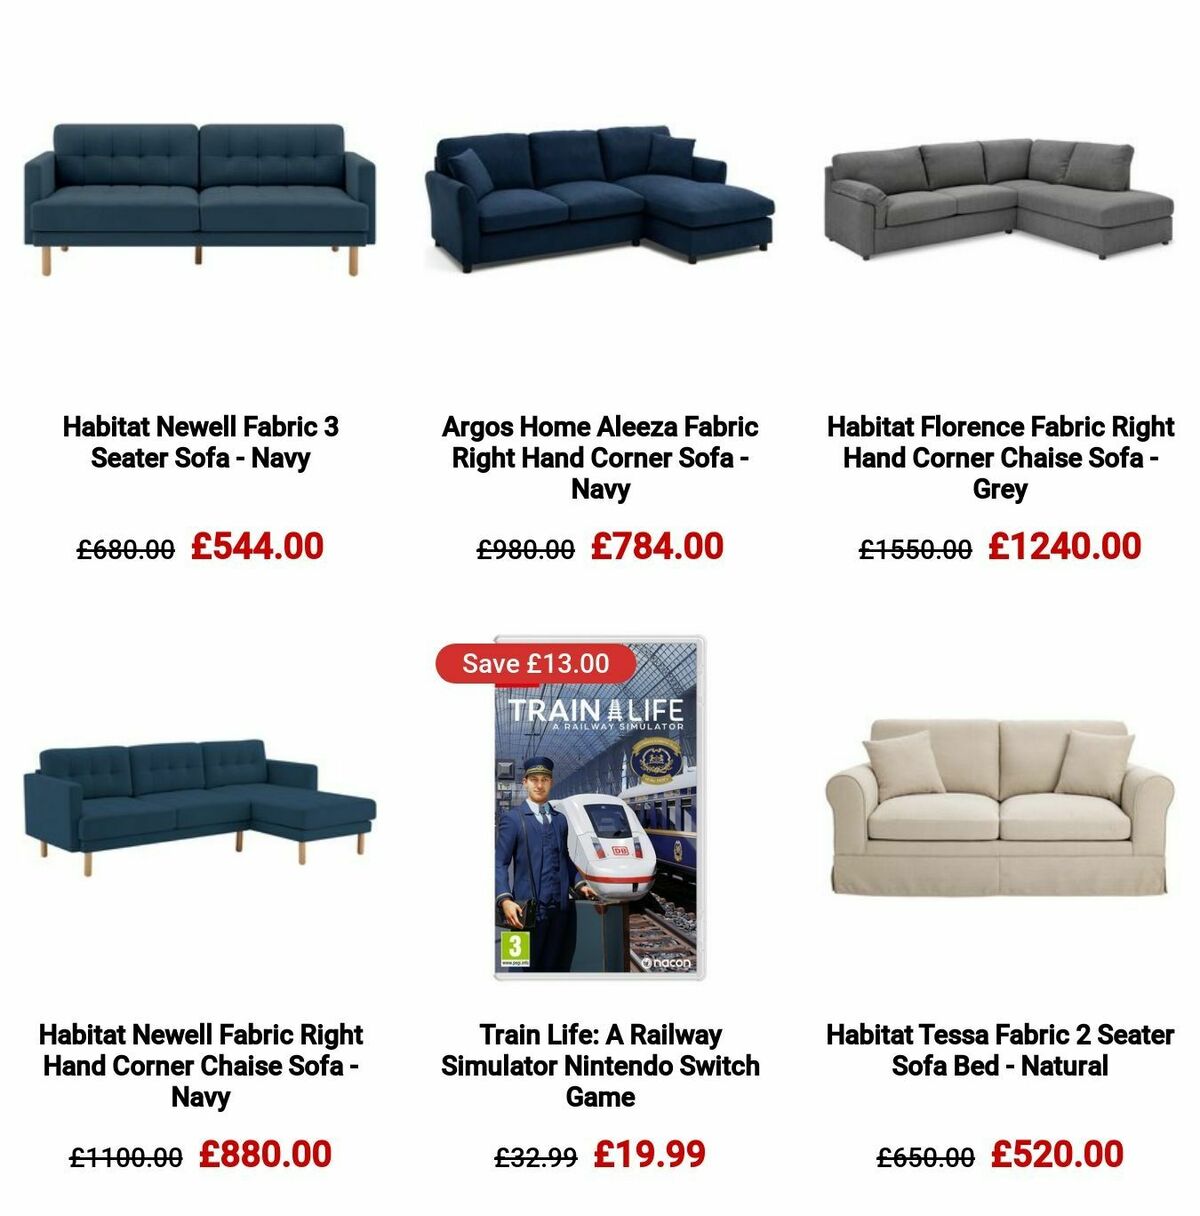 Argos Offers from 16 January